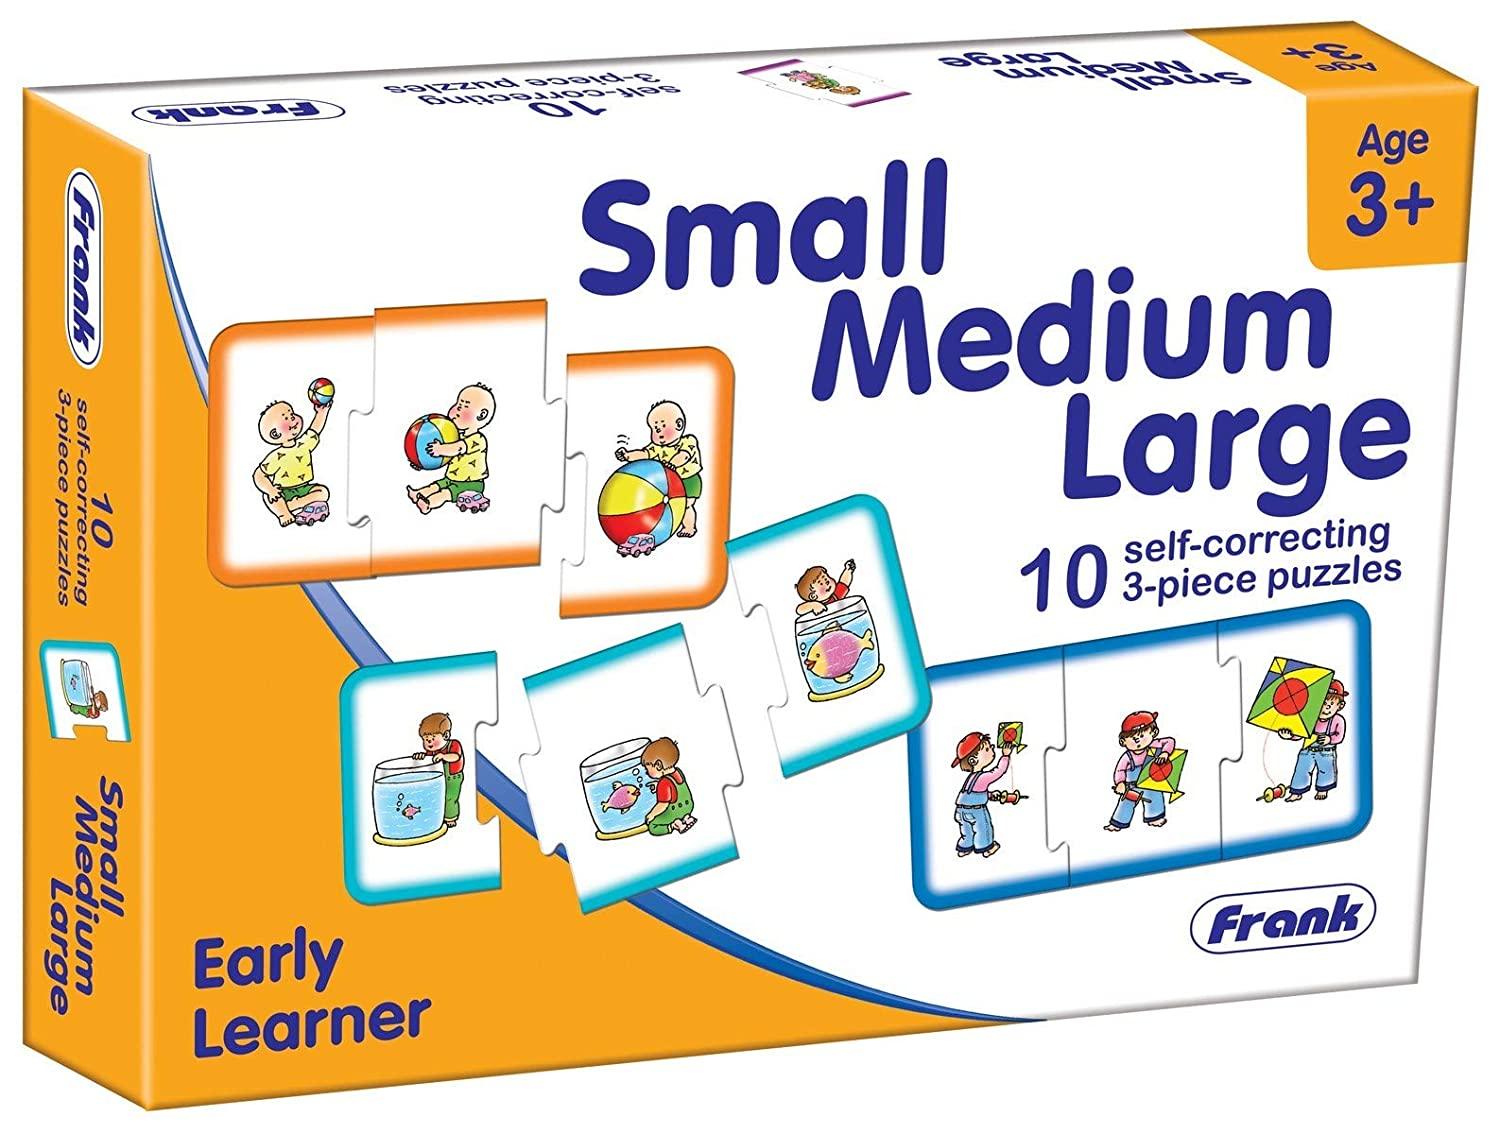 Frank Small Medium Large - Early Learner 10 Self-correcting 3-Piece Puzzles